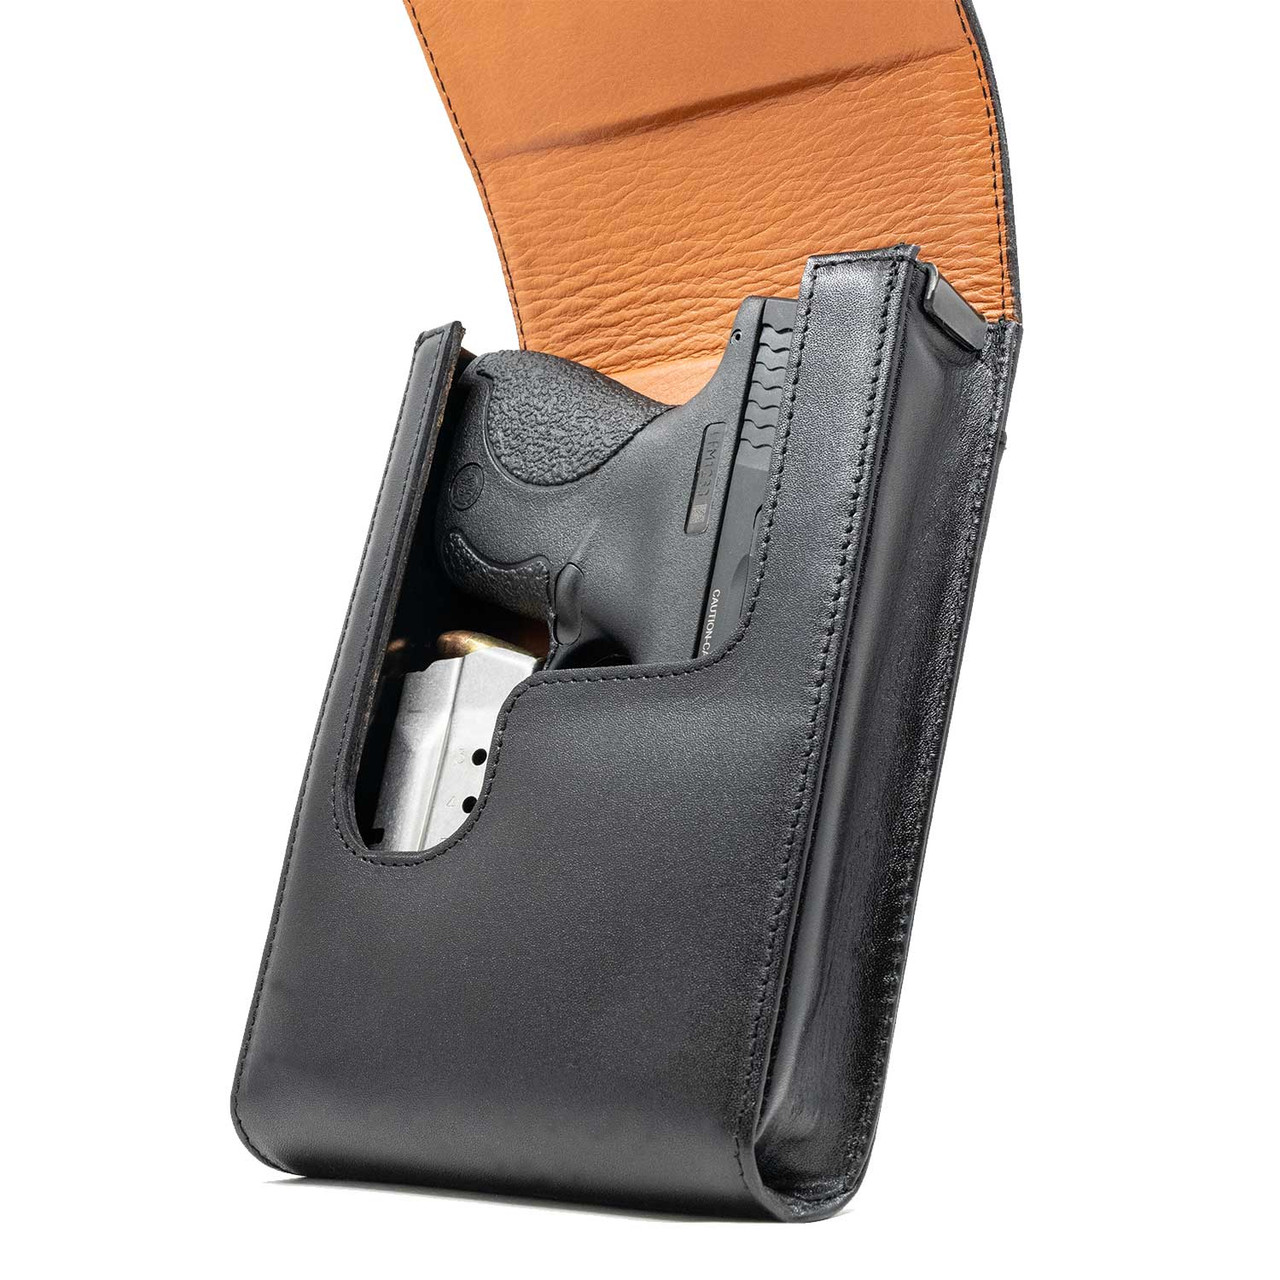 The Ruger EC9s Xtra Mag Black Leather Holster